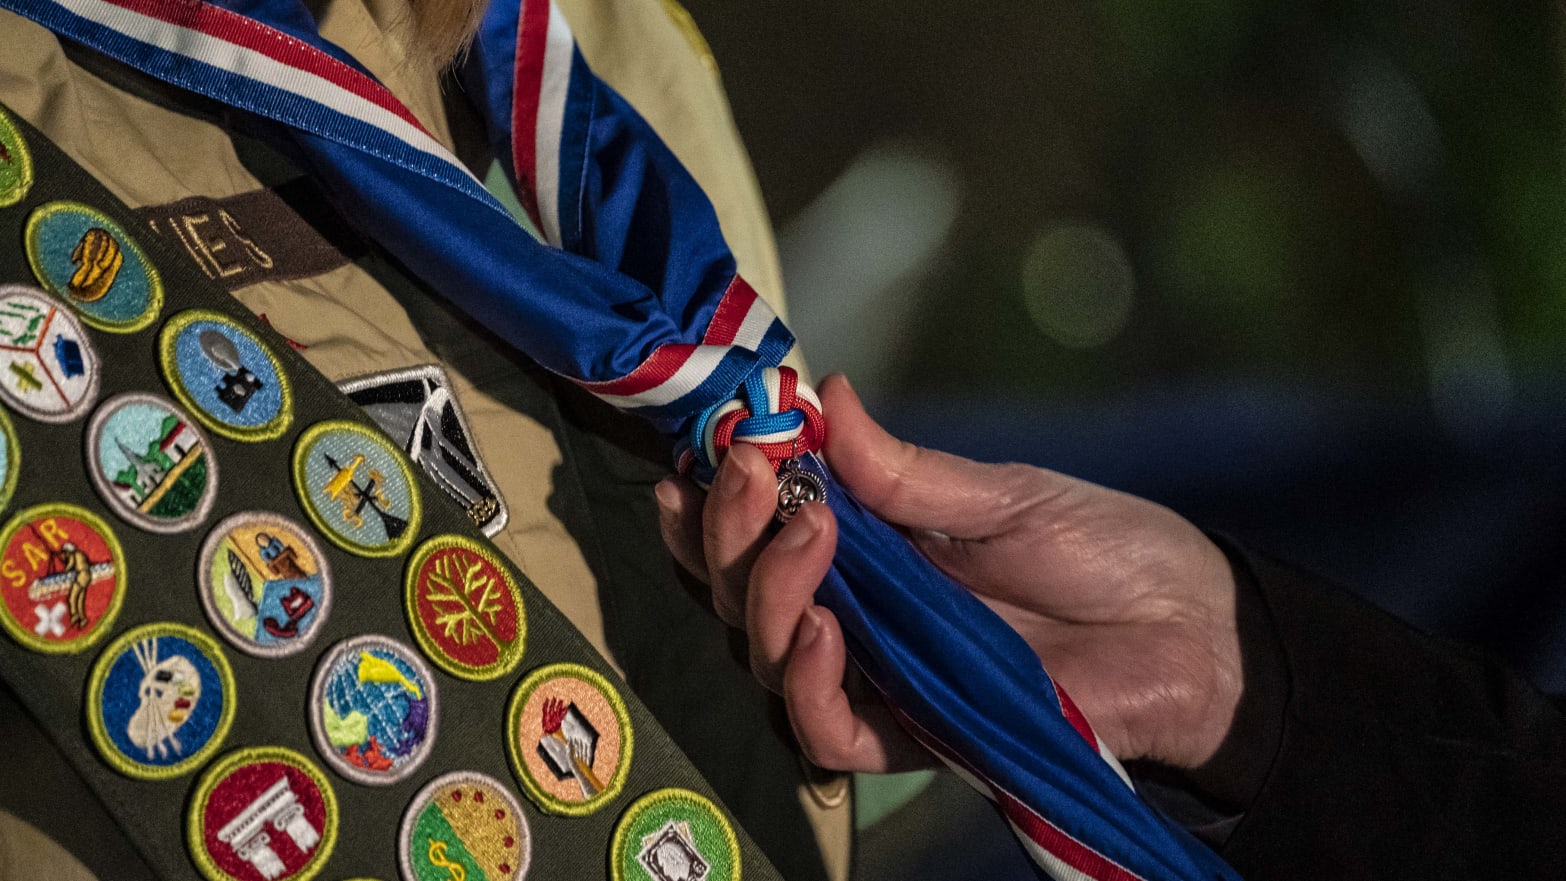 A scout receives her blue Eagle Scout neckerchief during a ceremony recognizing the inaugural class of female Eagle Scouts on Feb. 8, 2021, in Tacoma, Washington.